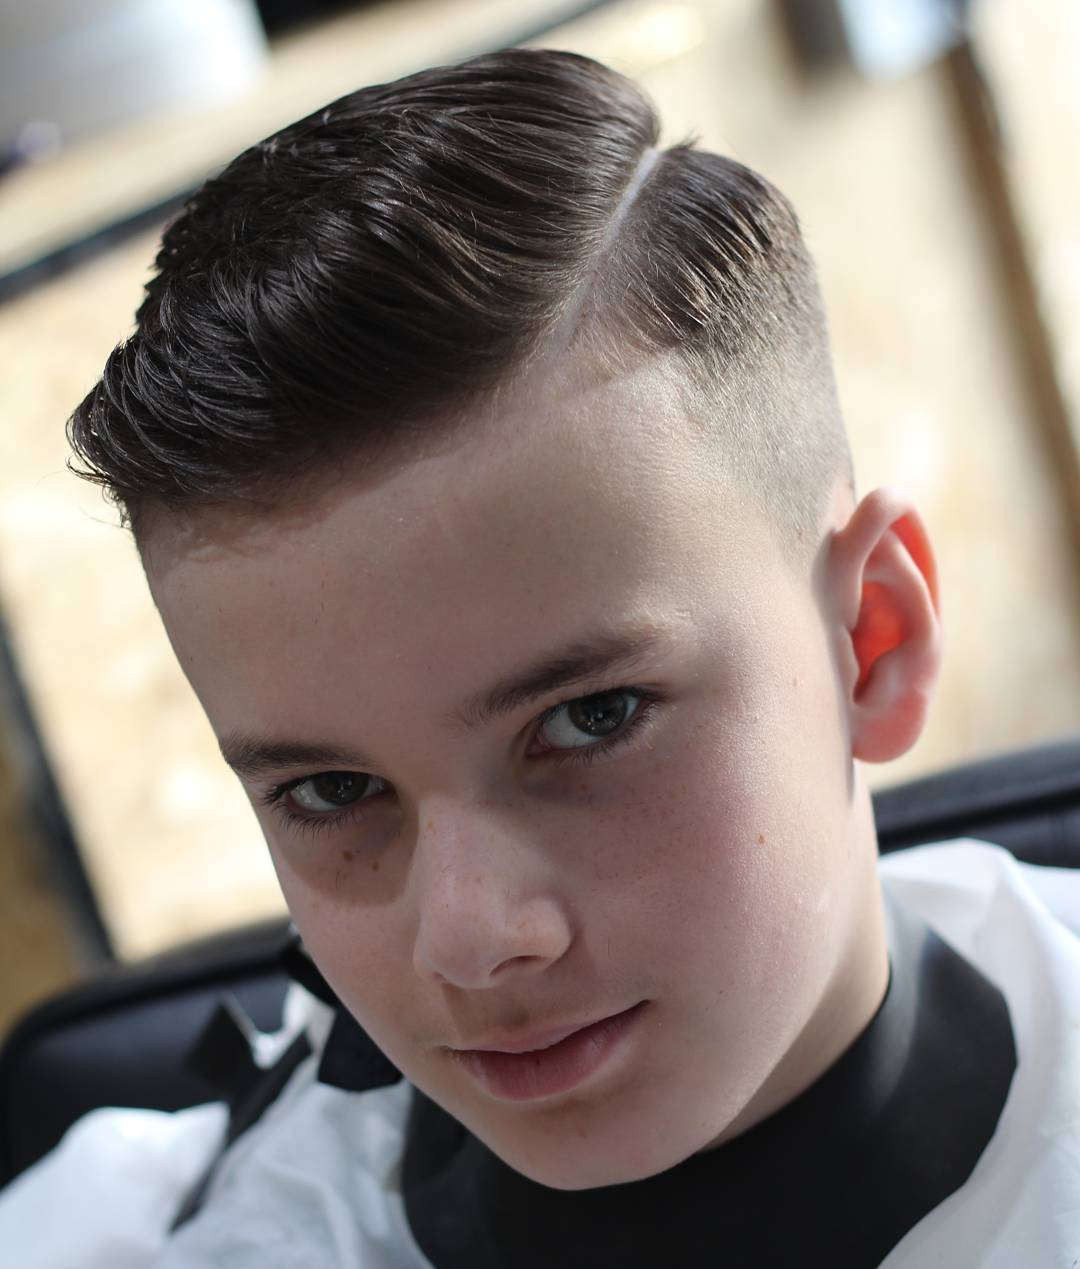 Haircuts Styles For Kids Boys
 50 Best Hairstyles for Teenage Boys The Ultimate Guide 2019